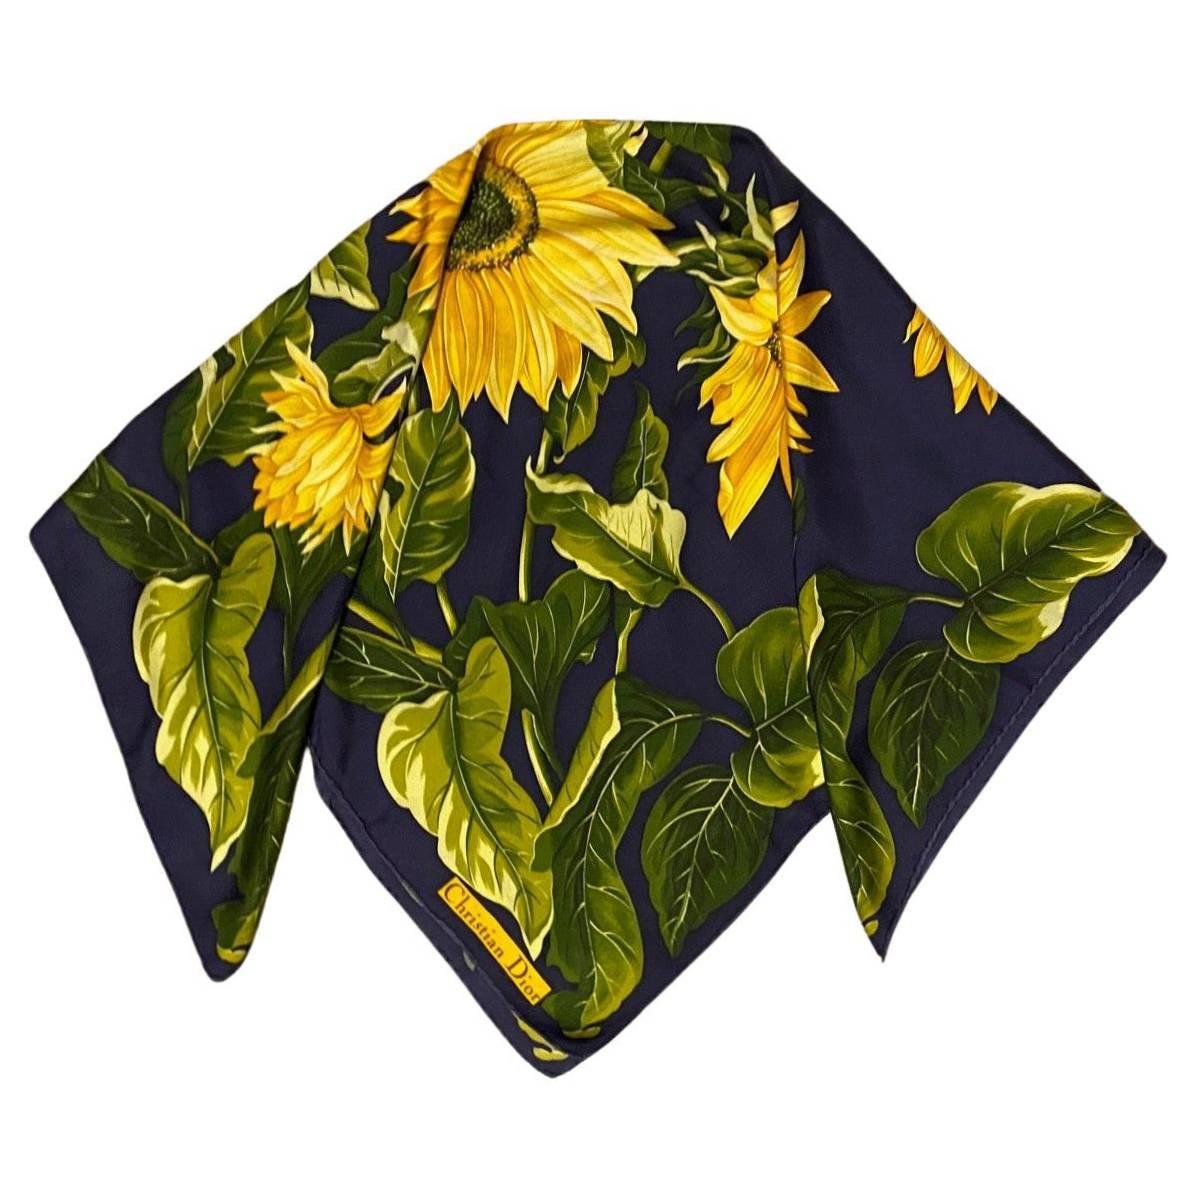 1980s Christian Dior Sunflowers Print Silk Scarf on Blue, handsewn edges, this luxurious and timeless design element will be sure to elevate your wardrobe and add a pop of color to your look.

Condition: vintage, 1980s,very good, minimal wear